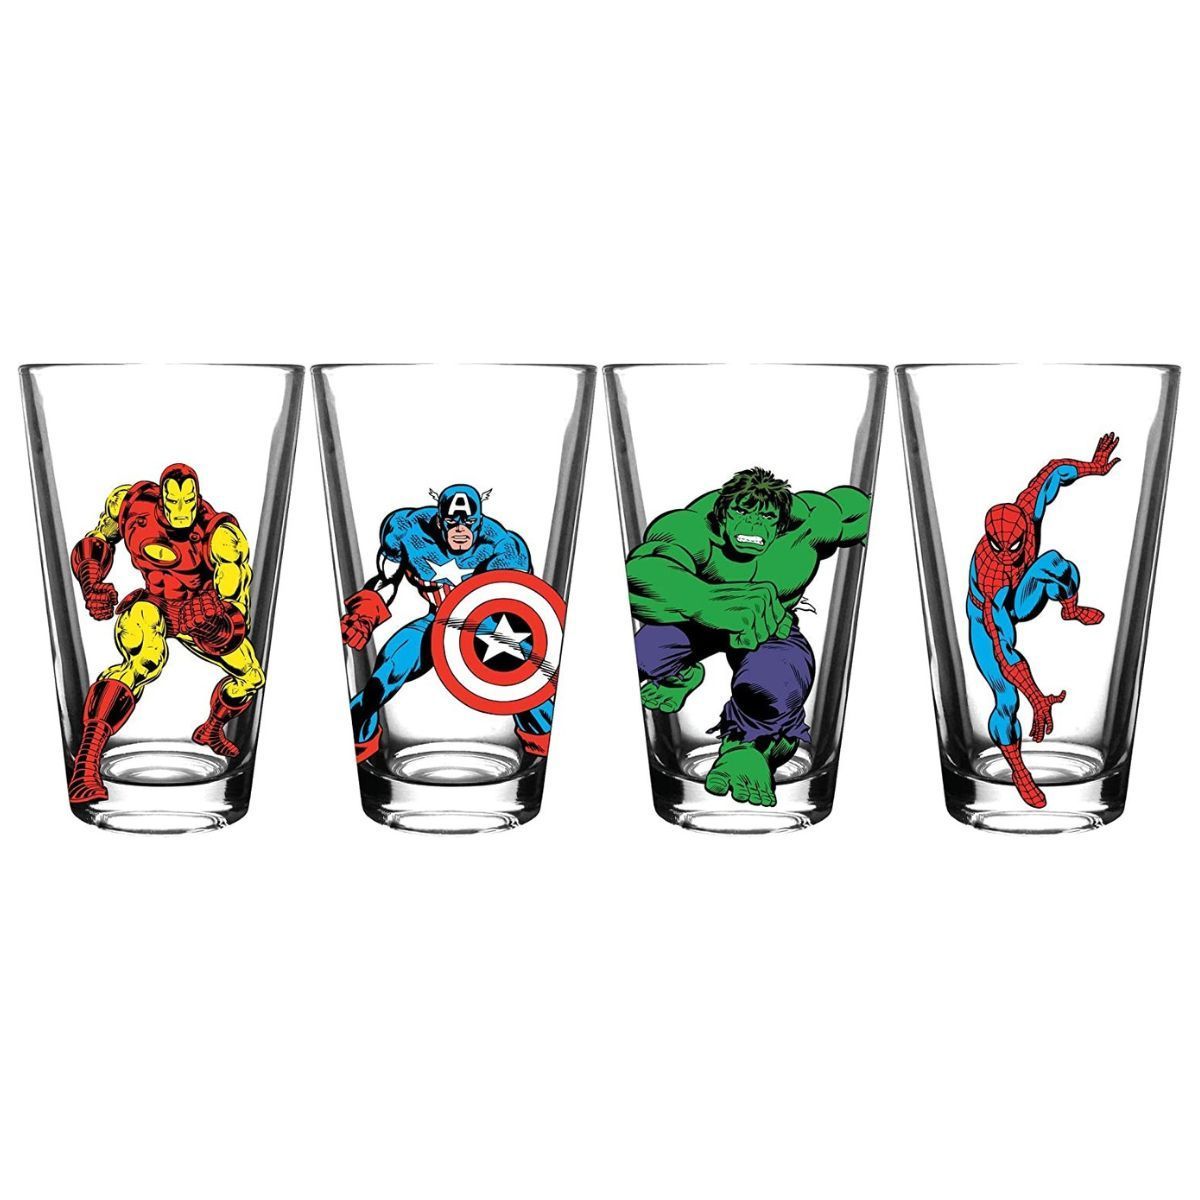 The 18 Best Marvel Gifts for Men That Will Arrive Before Christmas